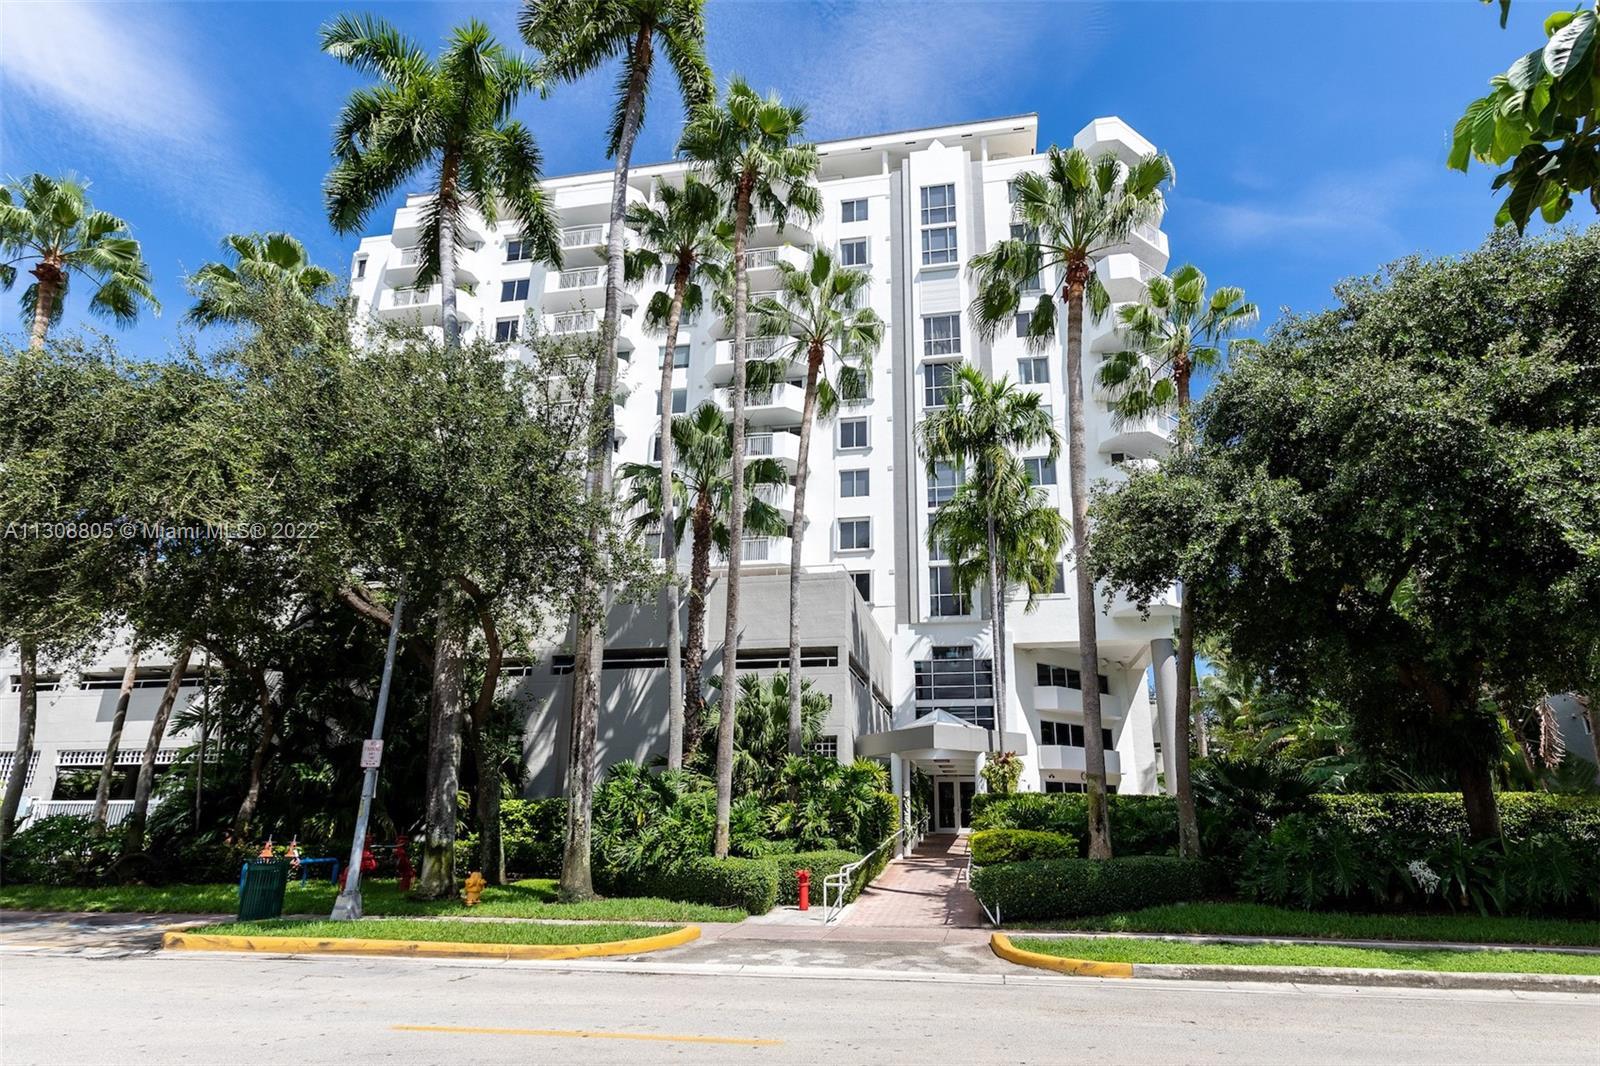 Bay view apartment in a full-service boutique building. Live in the heart of South Beach! 2 bed / 2 